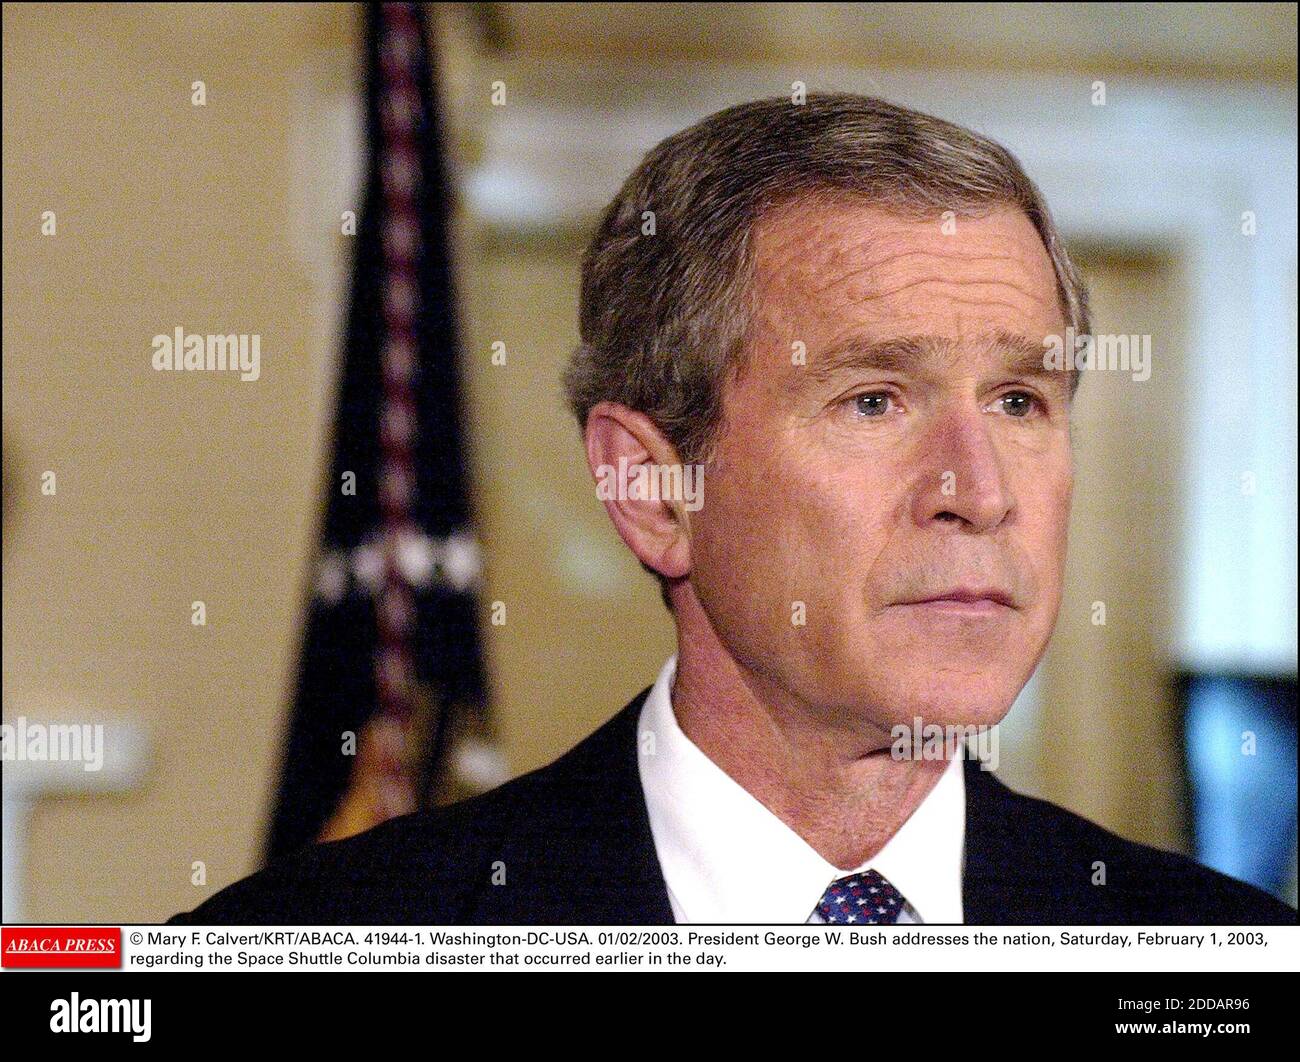 NO FILM, NO VIDEO, NO TV, NO DOCUMENTARY - © Mary F. Calvert/KRT/ABACA. 41944-1. Washington-DC-USA. 01/02/2003. President George W. Bush addresses the nation, Saturday, February 1, 2003, regarding the Space Shuttle Columbia disaster that occurred earlier in the day. Stock Photo